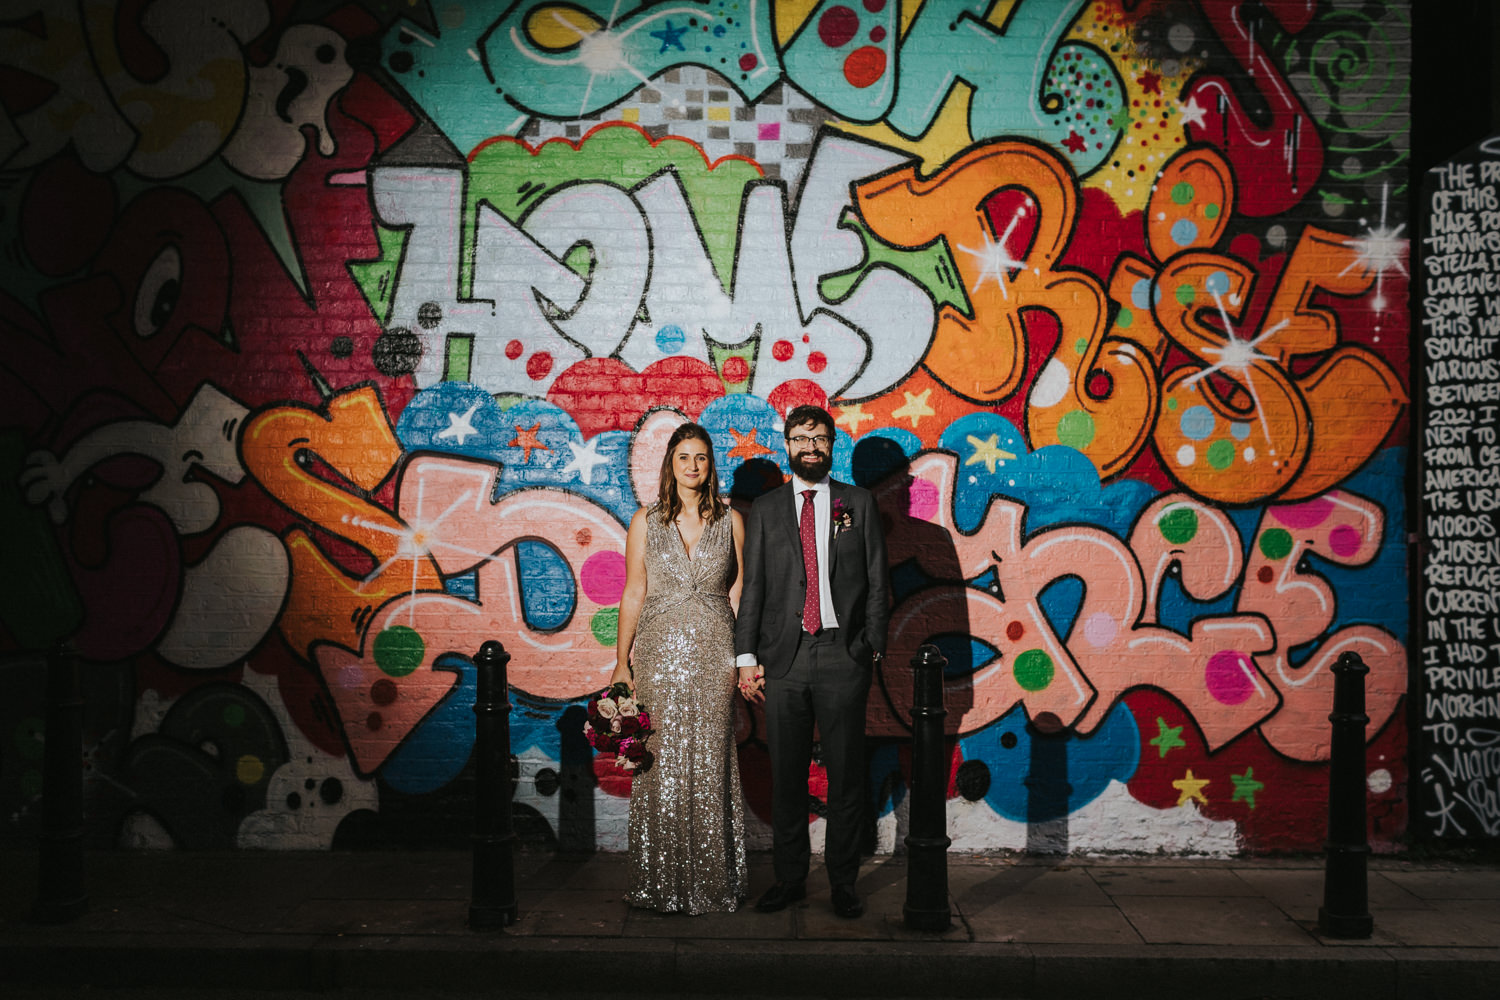 Bride and groom in front of street art in Shoreditch London.